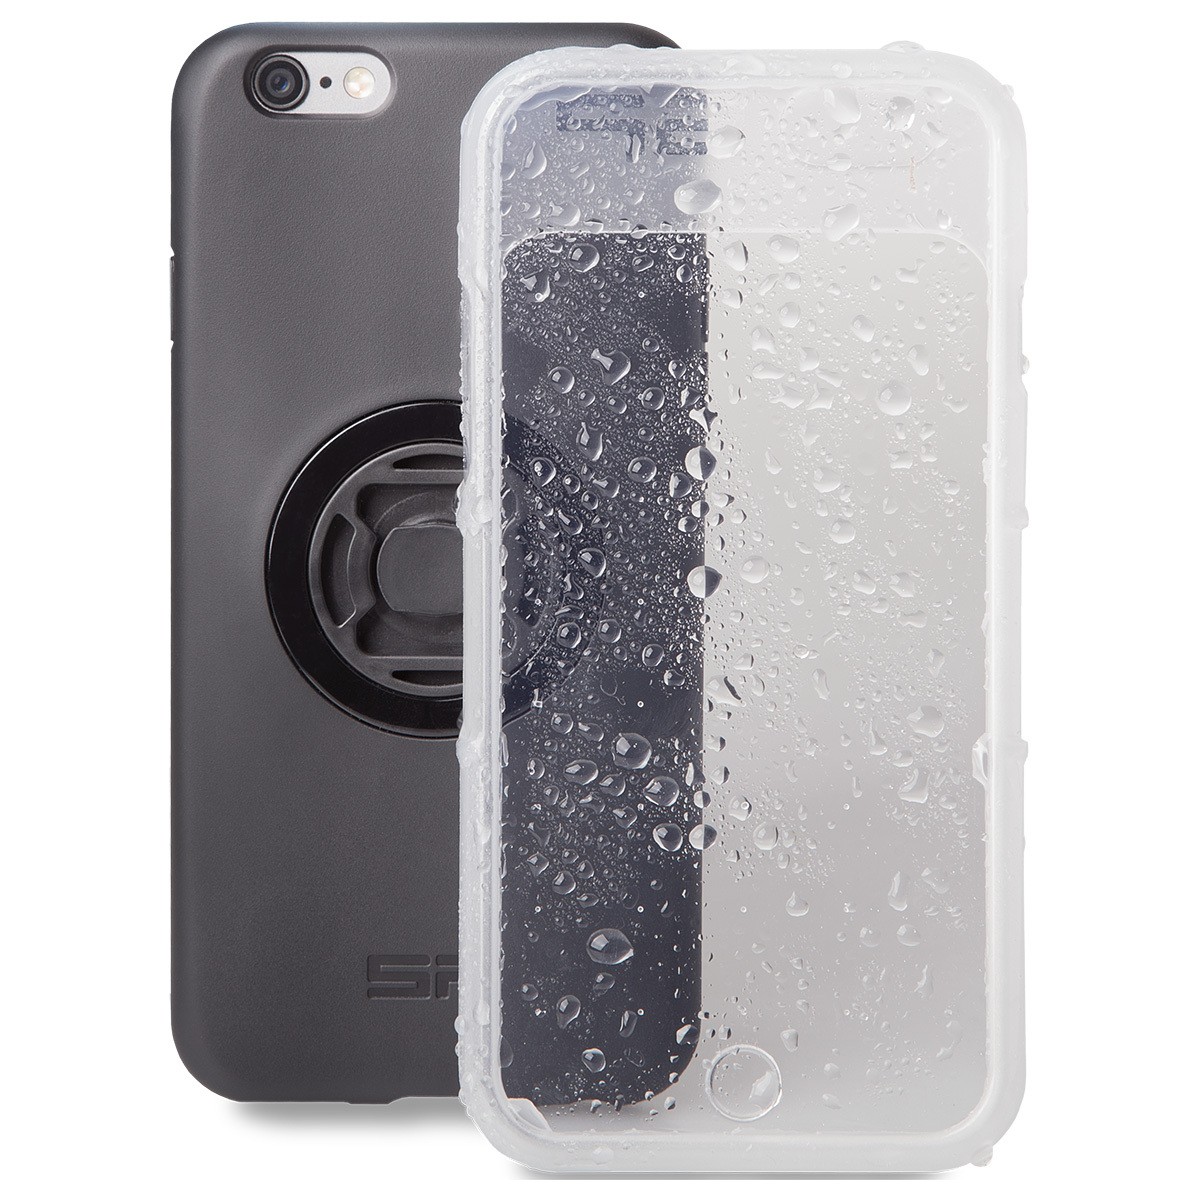 SP Connect Carcasa Impermeable Iphone 6/6S